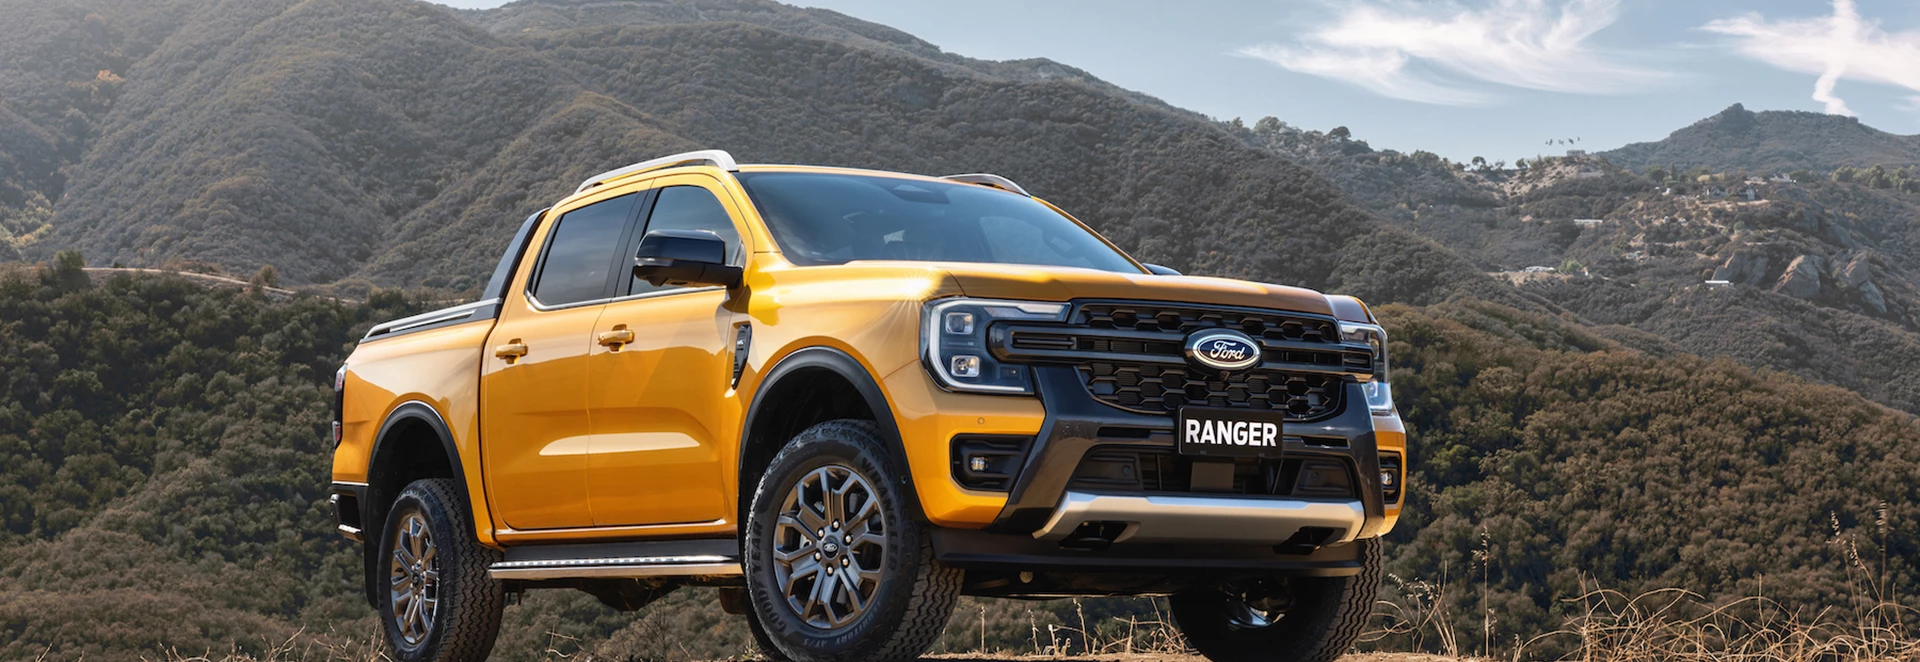 Ford reveals new Ranger as bold, tech-laden pick-up 